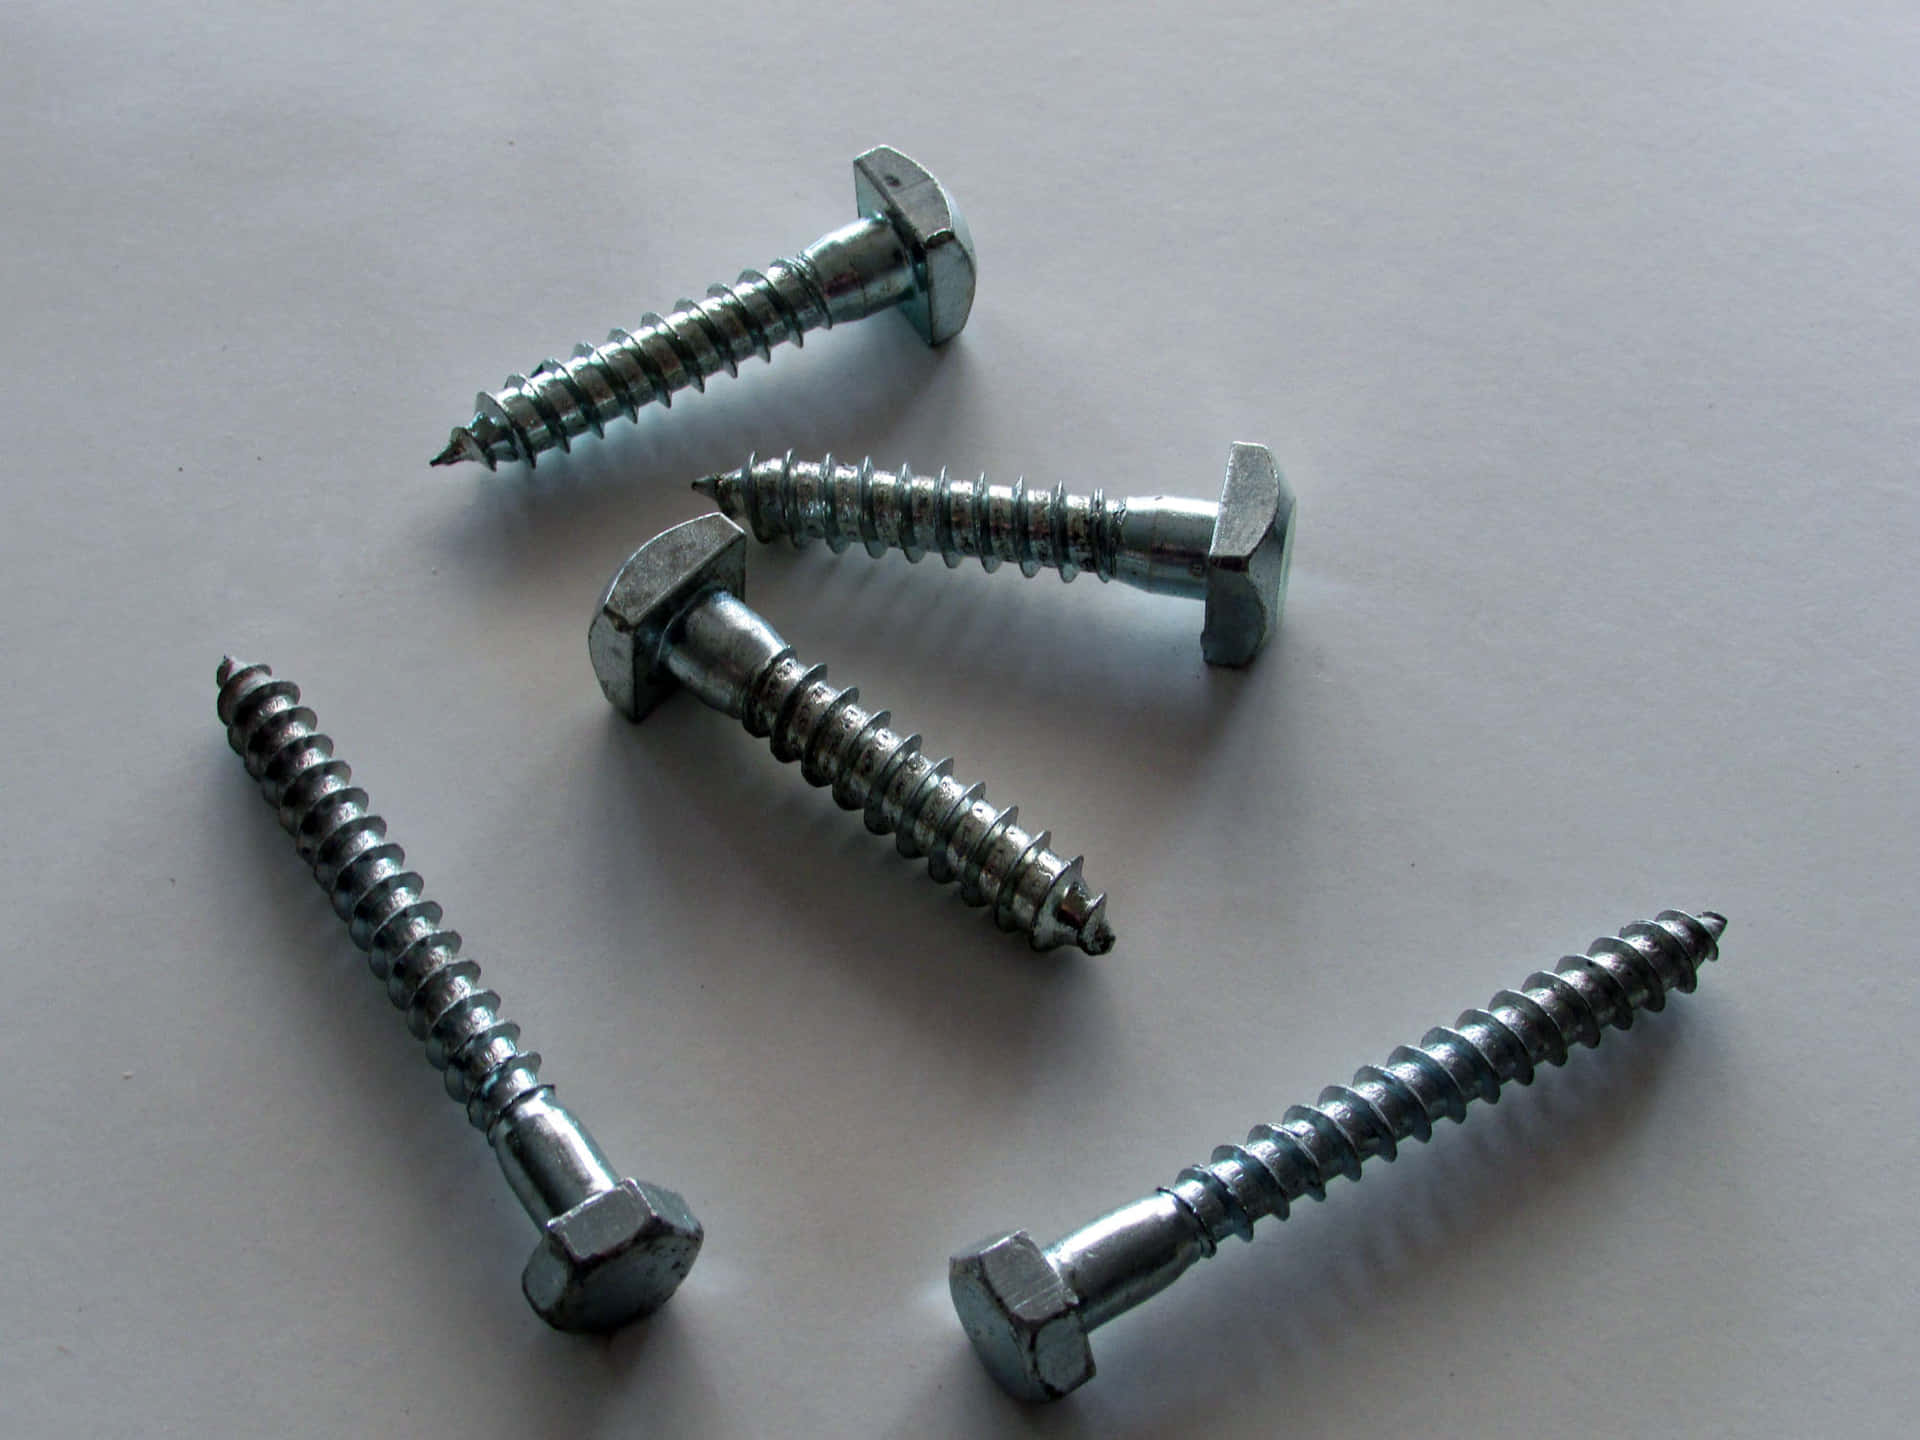 "Close-Up View of Industrial Metal Screw"